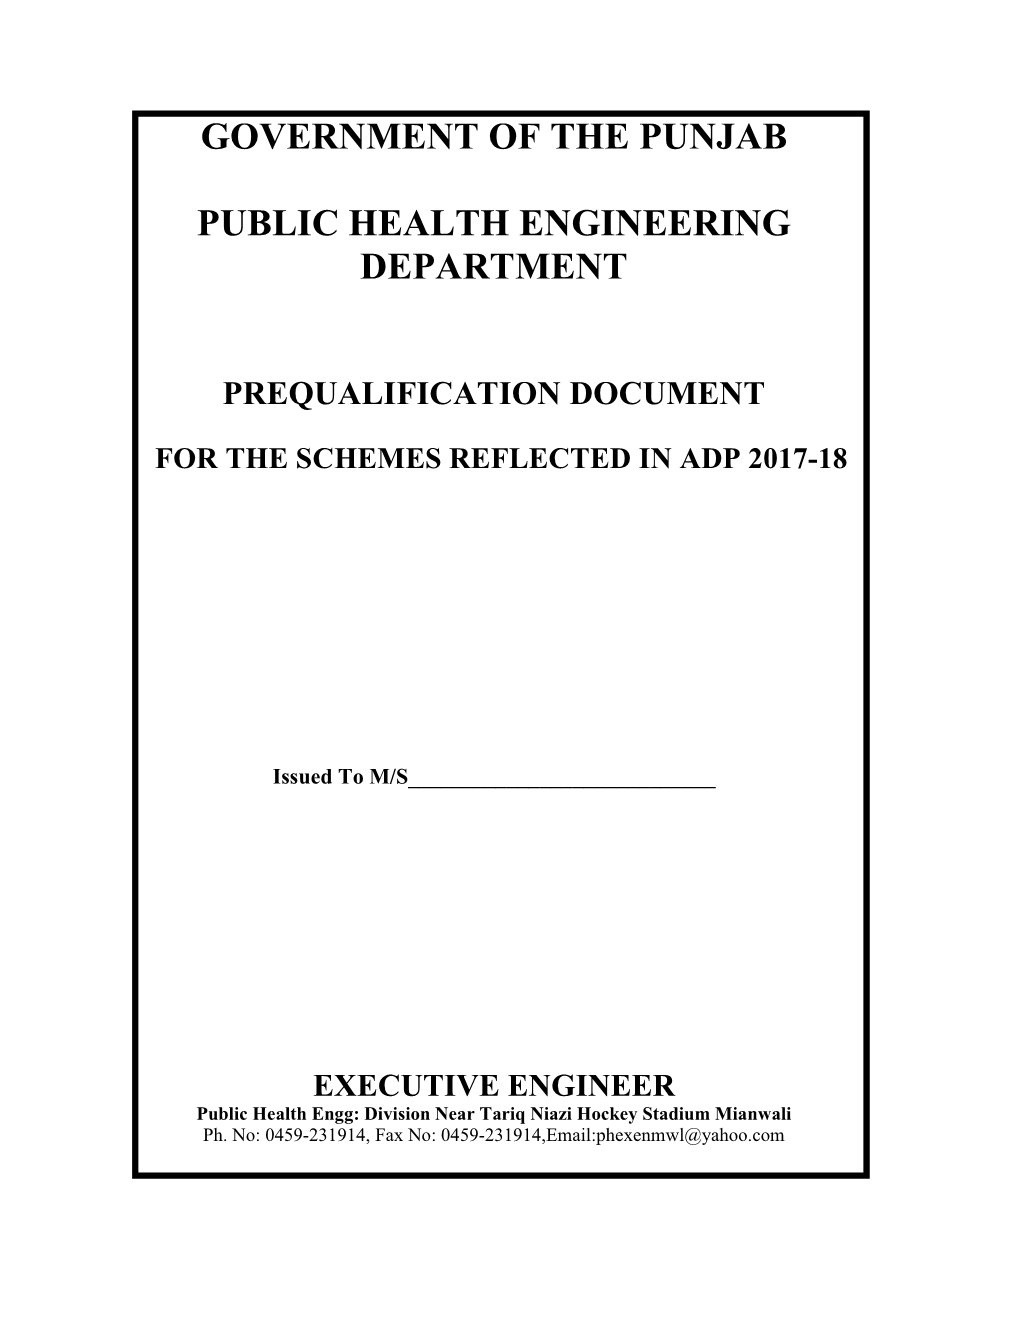 Government of the Punjab Public Health Engineering